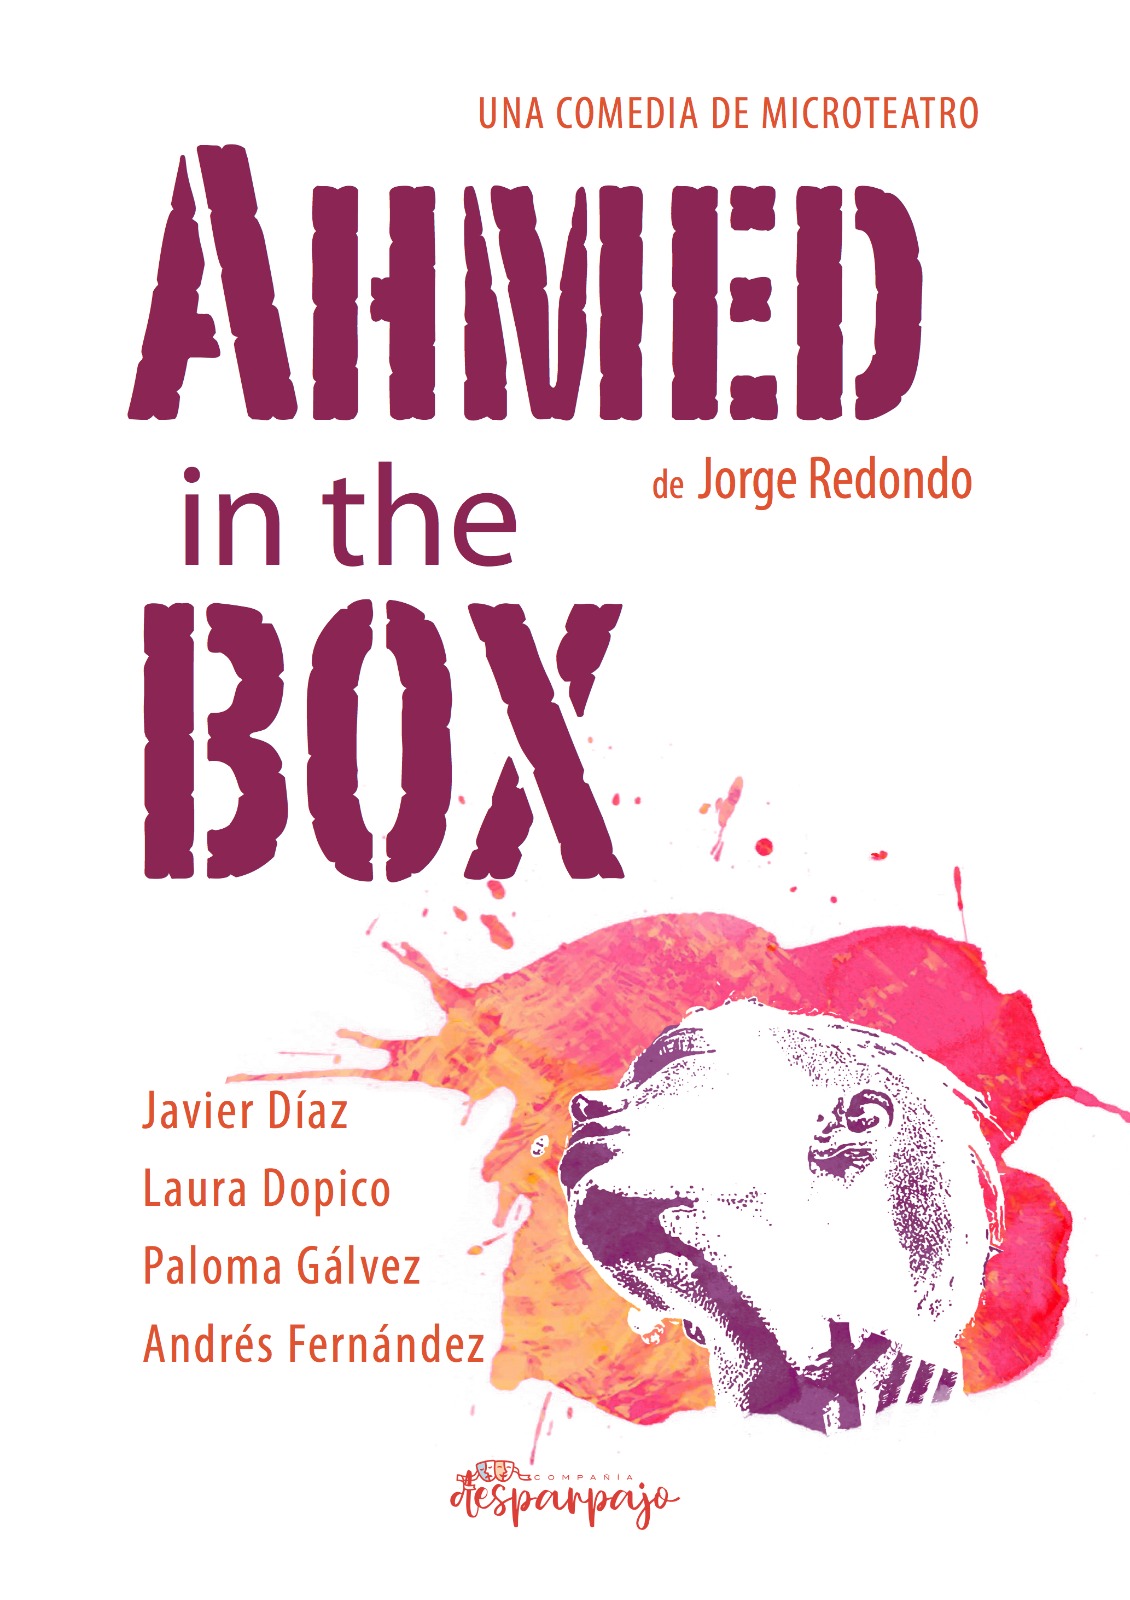 Ahmed in the box